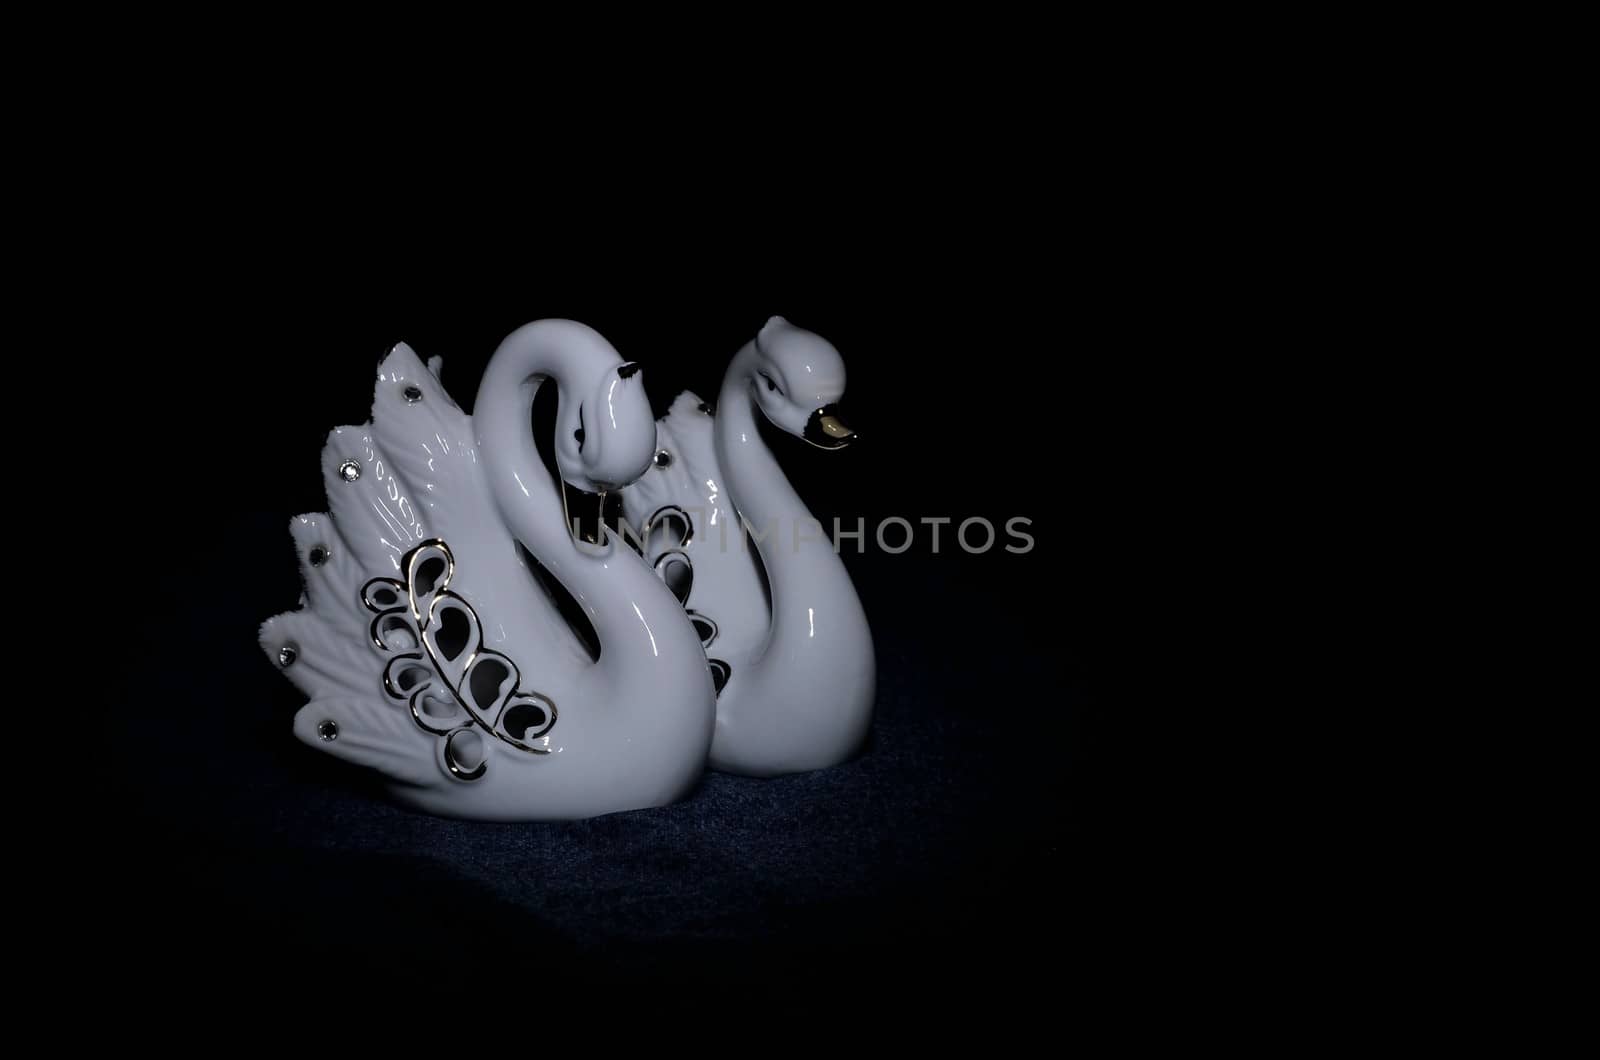 Photo of two ceramic figures of swans on a dark background.